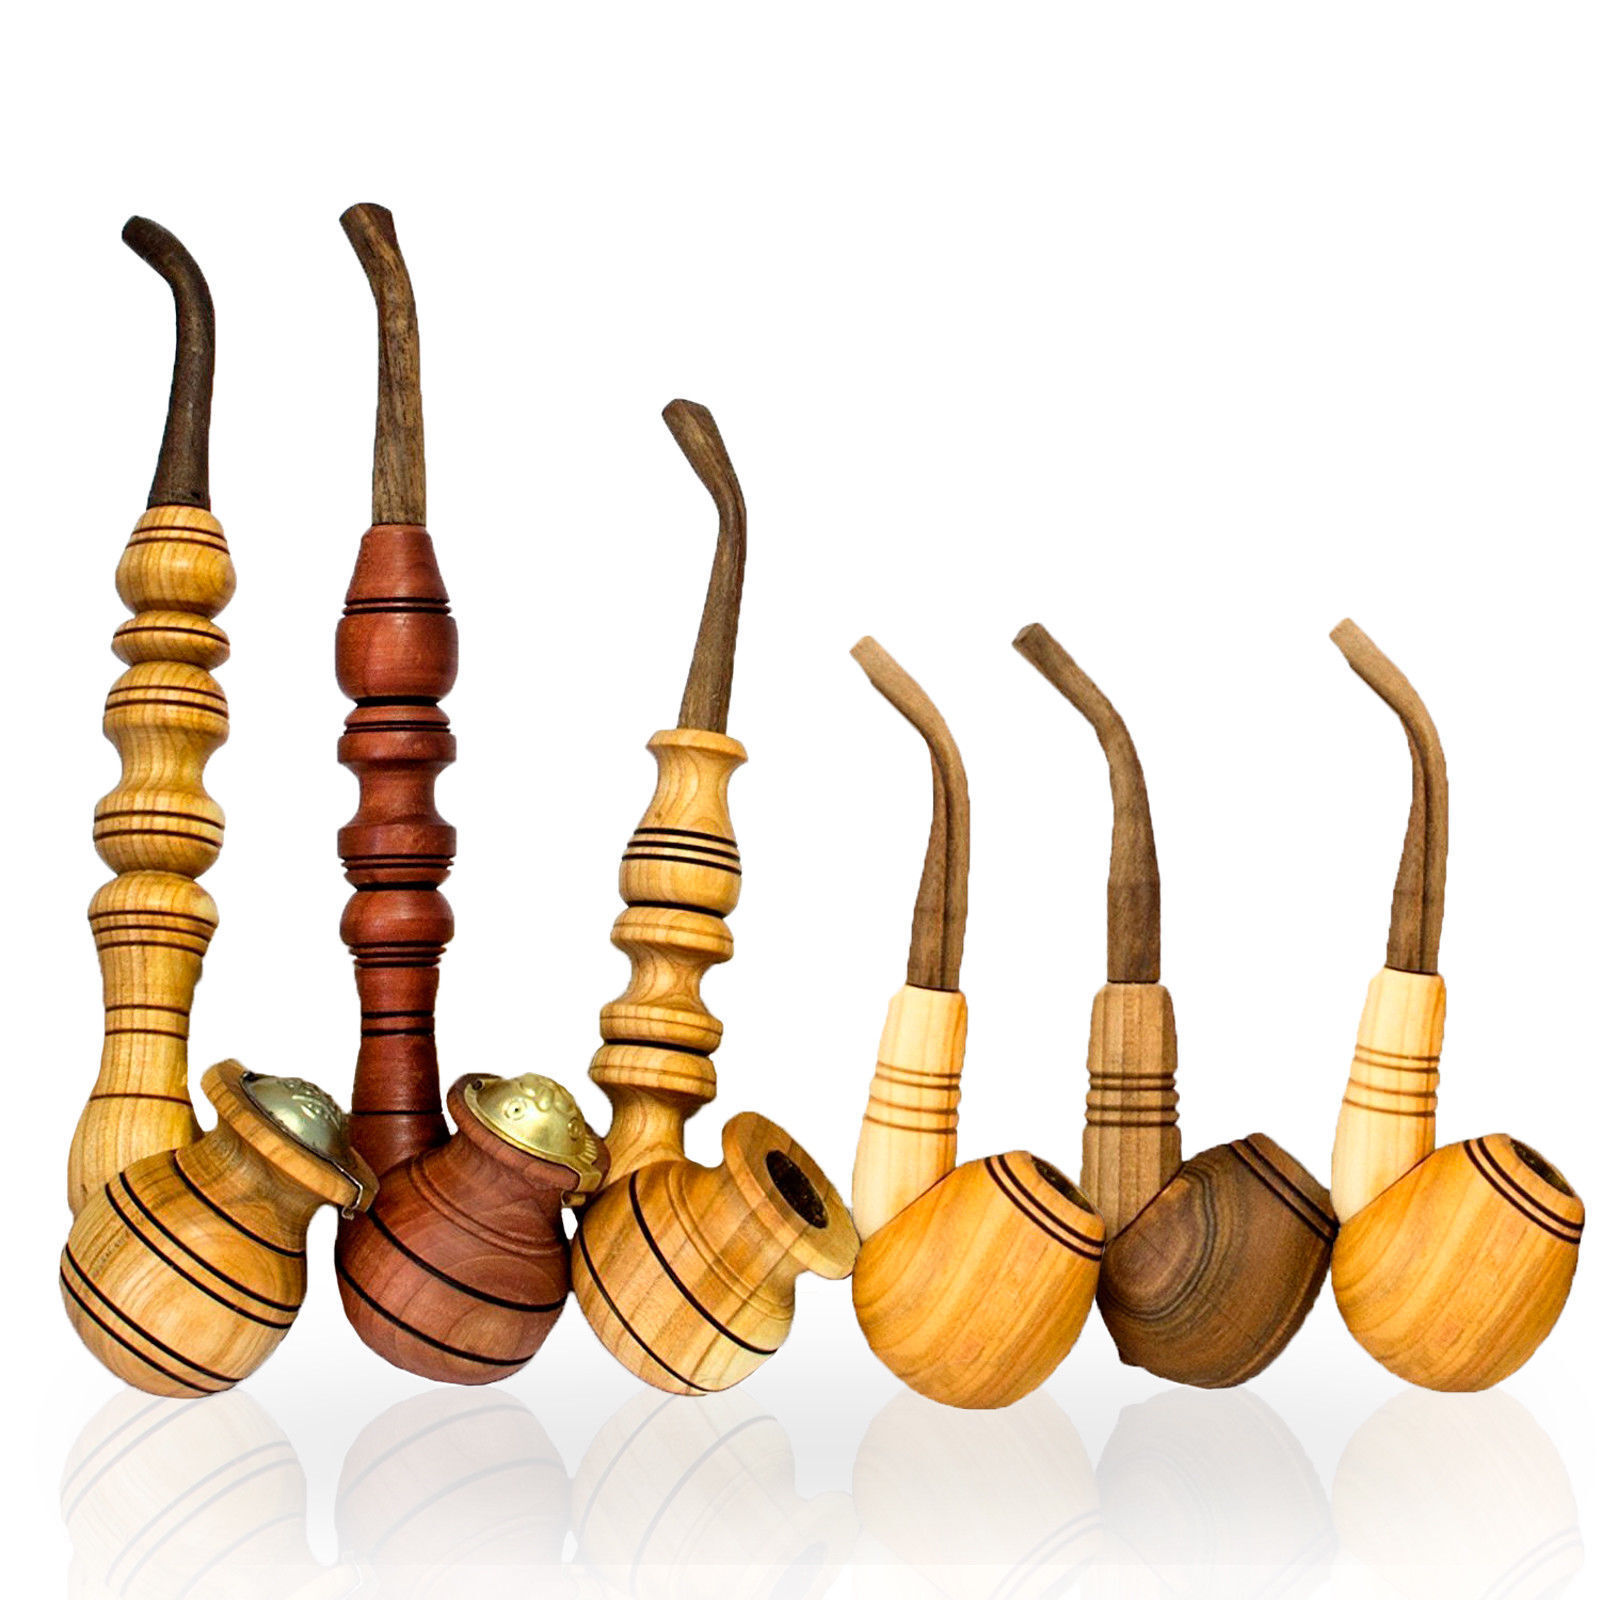 SET OF 6 Wooden Tobacco Pipes Walnut Cherry Plum Wood Smoking Pipe HAND-CARVED